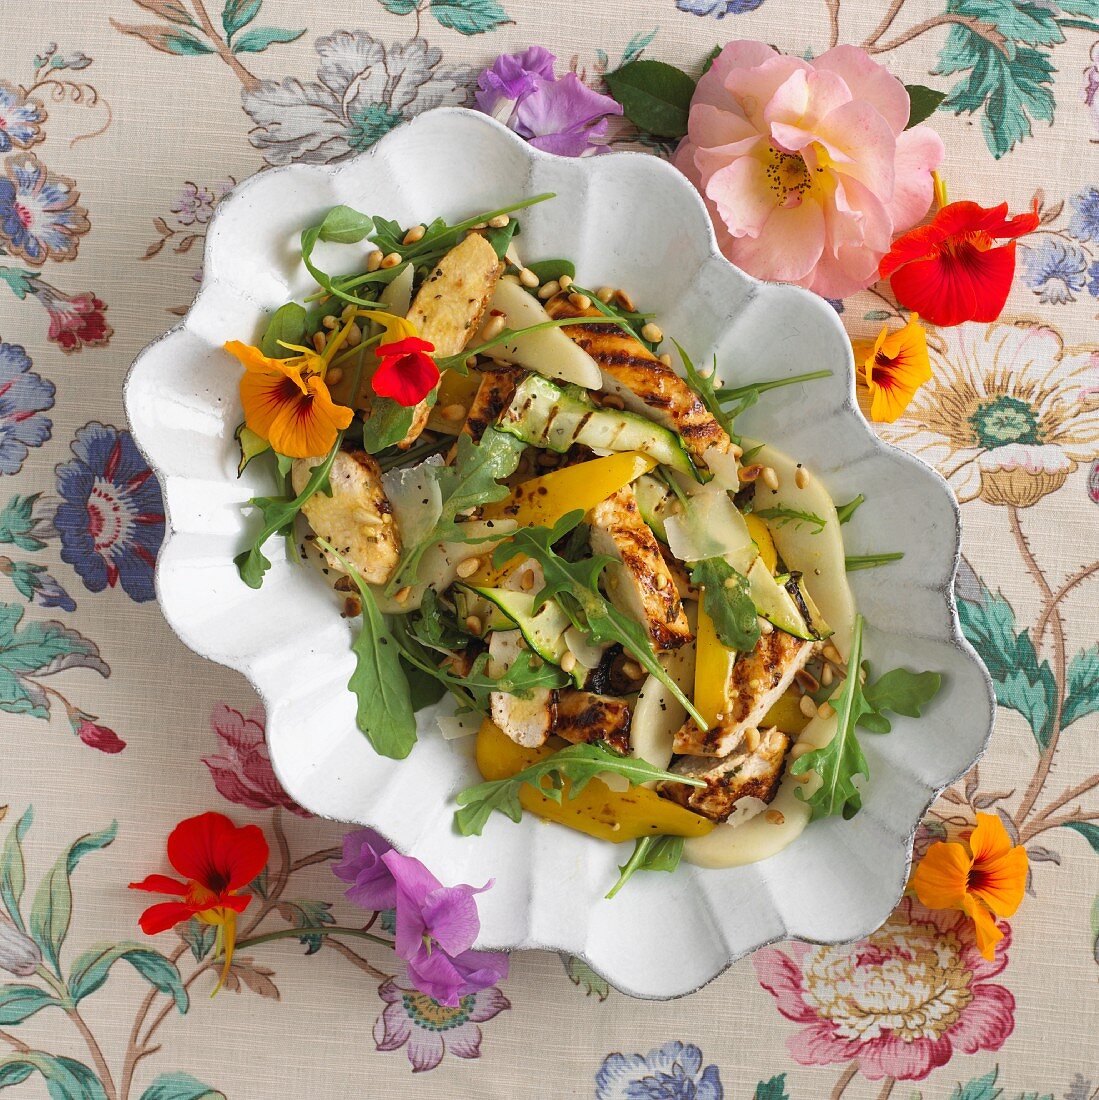 Summery chicken salad with peppers, rocket and nasturtium flowers